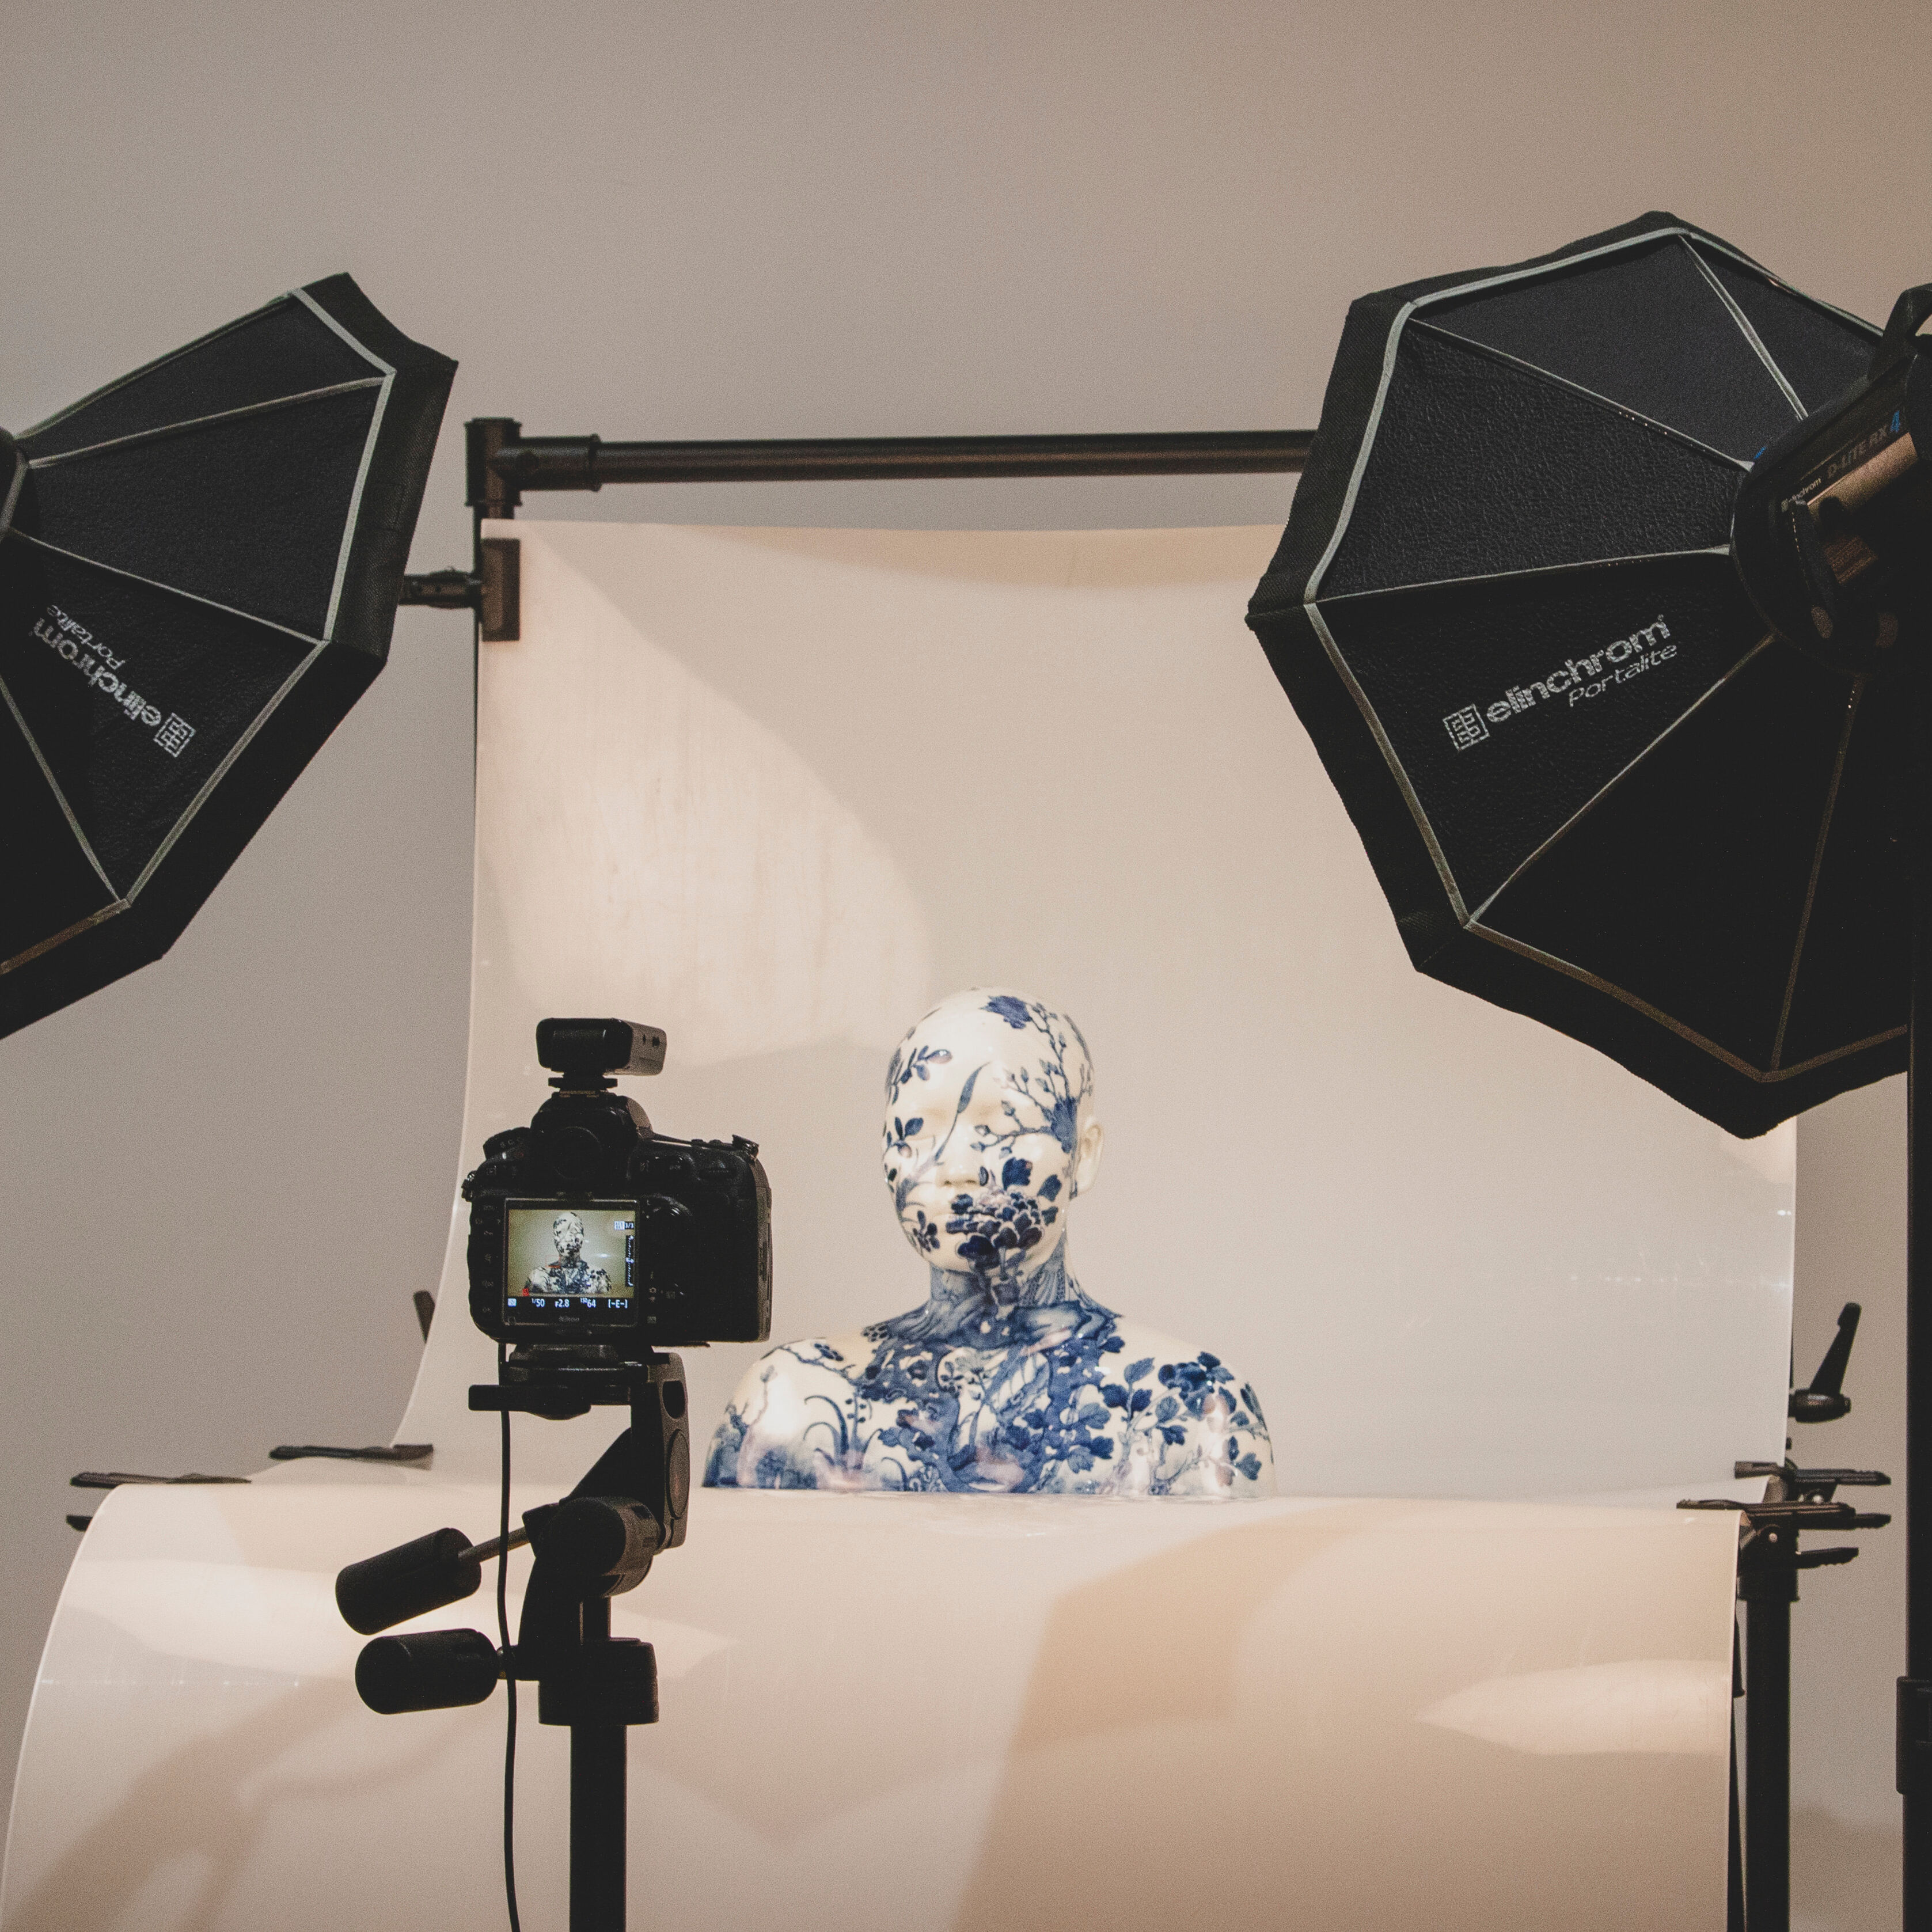 A white ceramic bust with blue floral design overall is sitting against a white photography backdrop, in the foreground is a camera with the bust visible in the viewfinder. Two large black studio lights stand on either side of the ceramic bust.